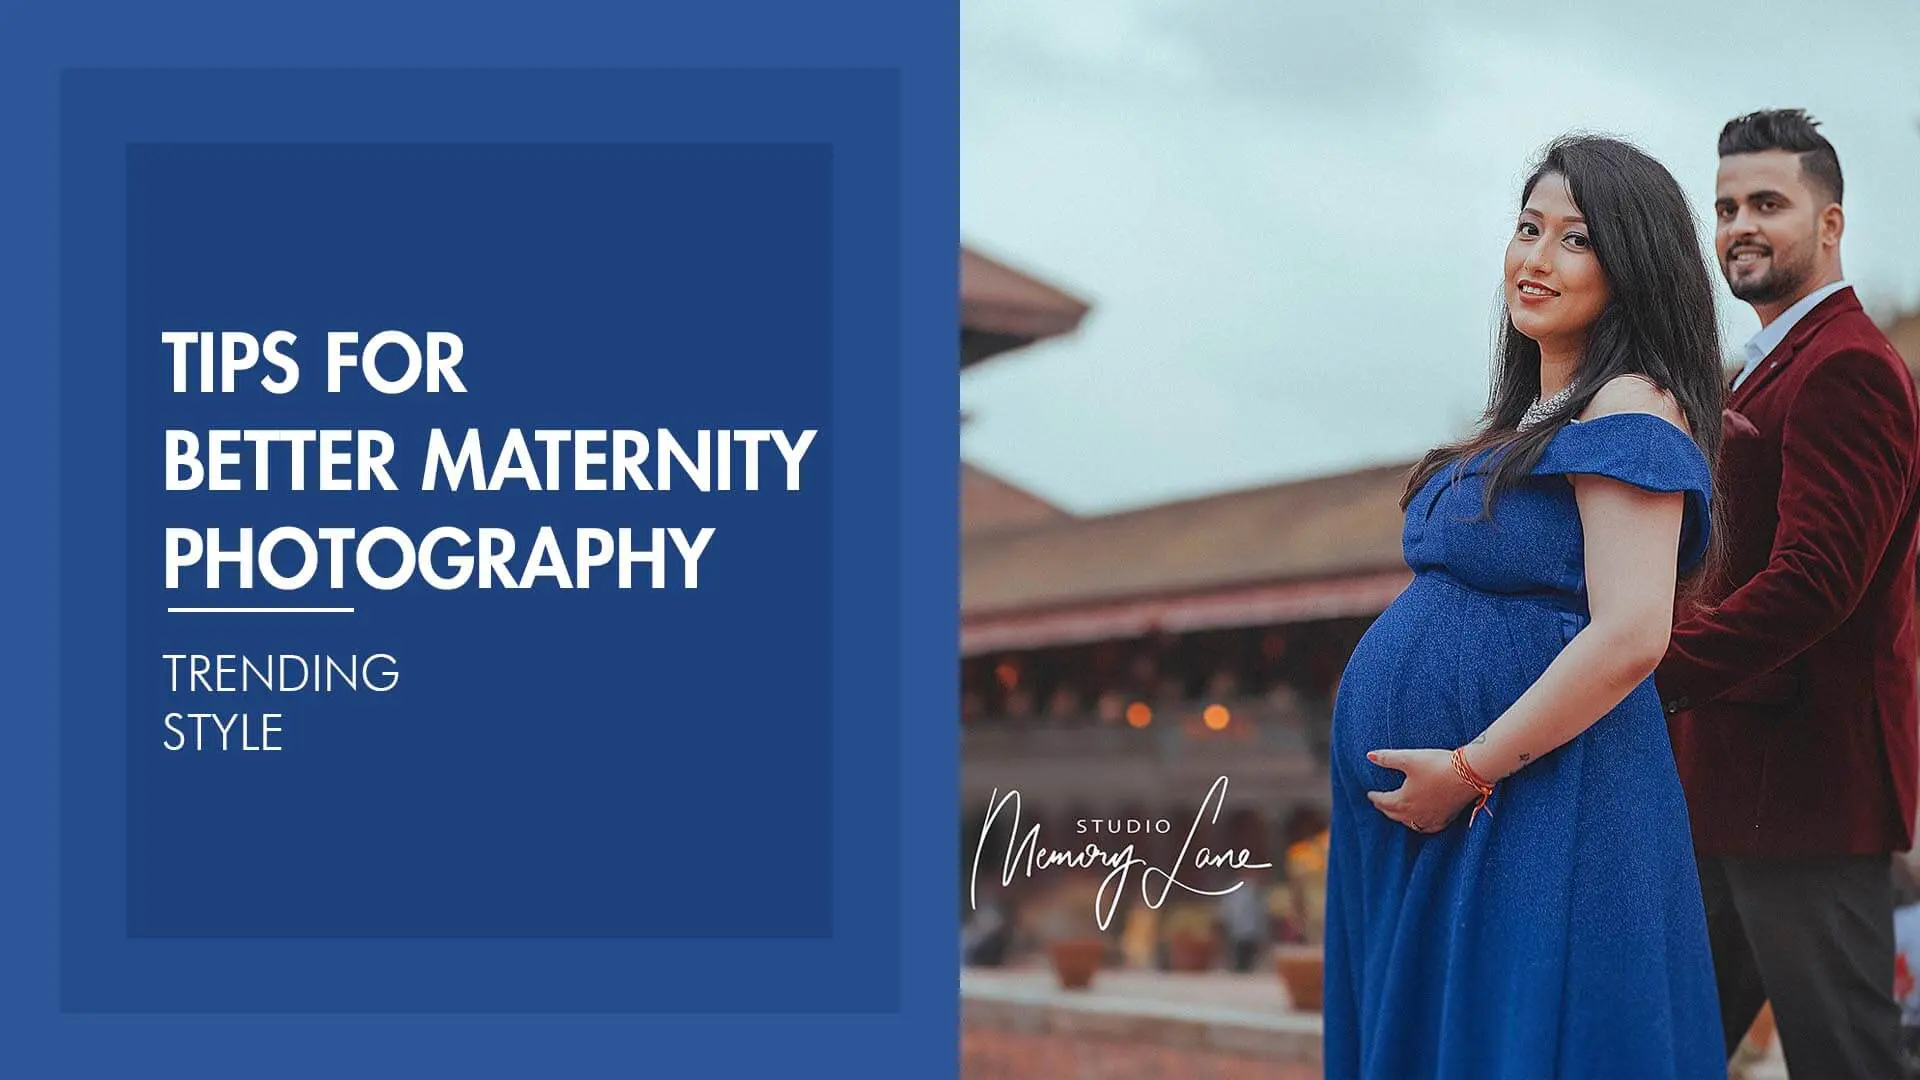 Tips for better maternity photography